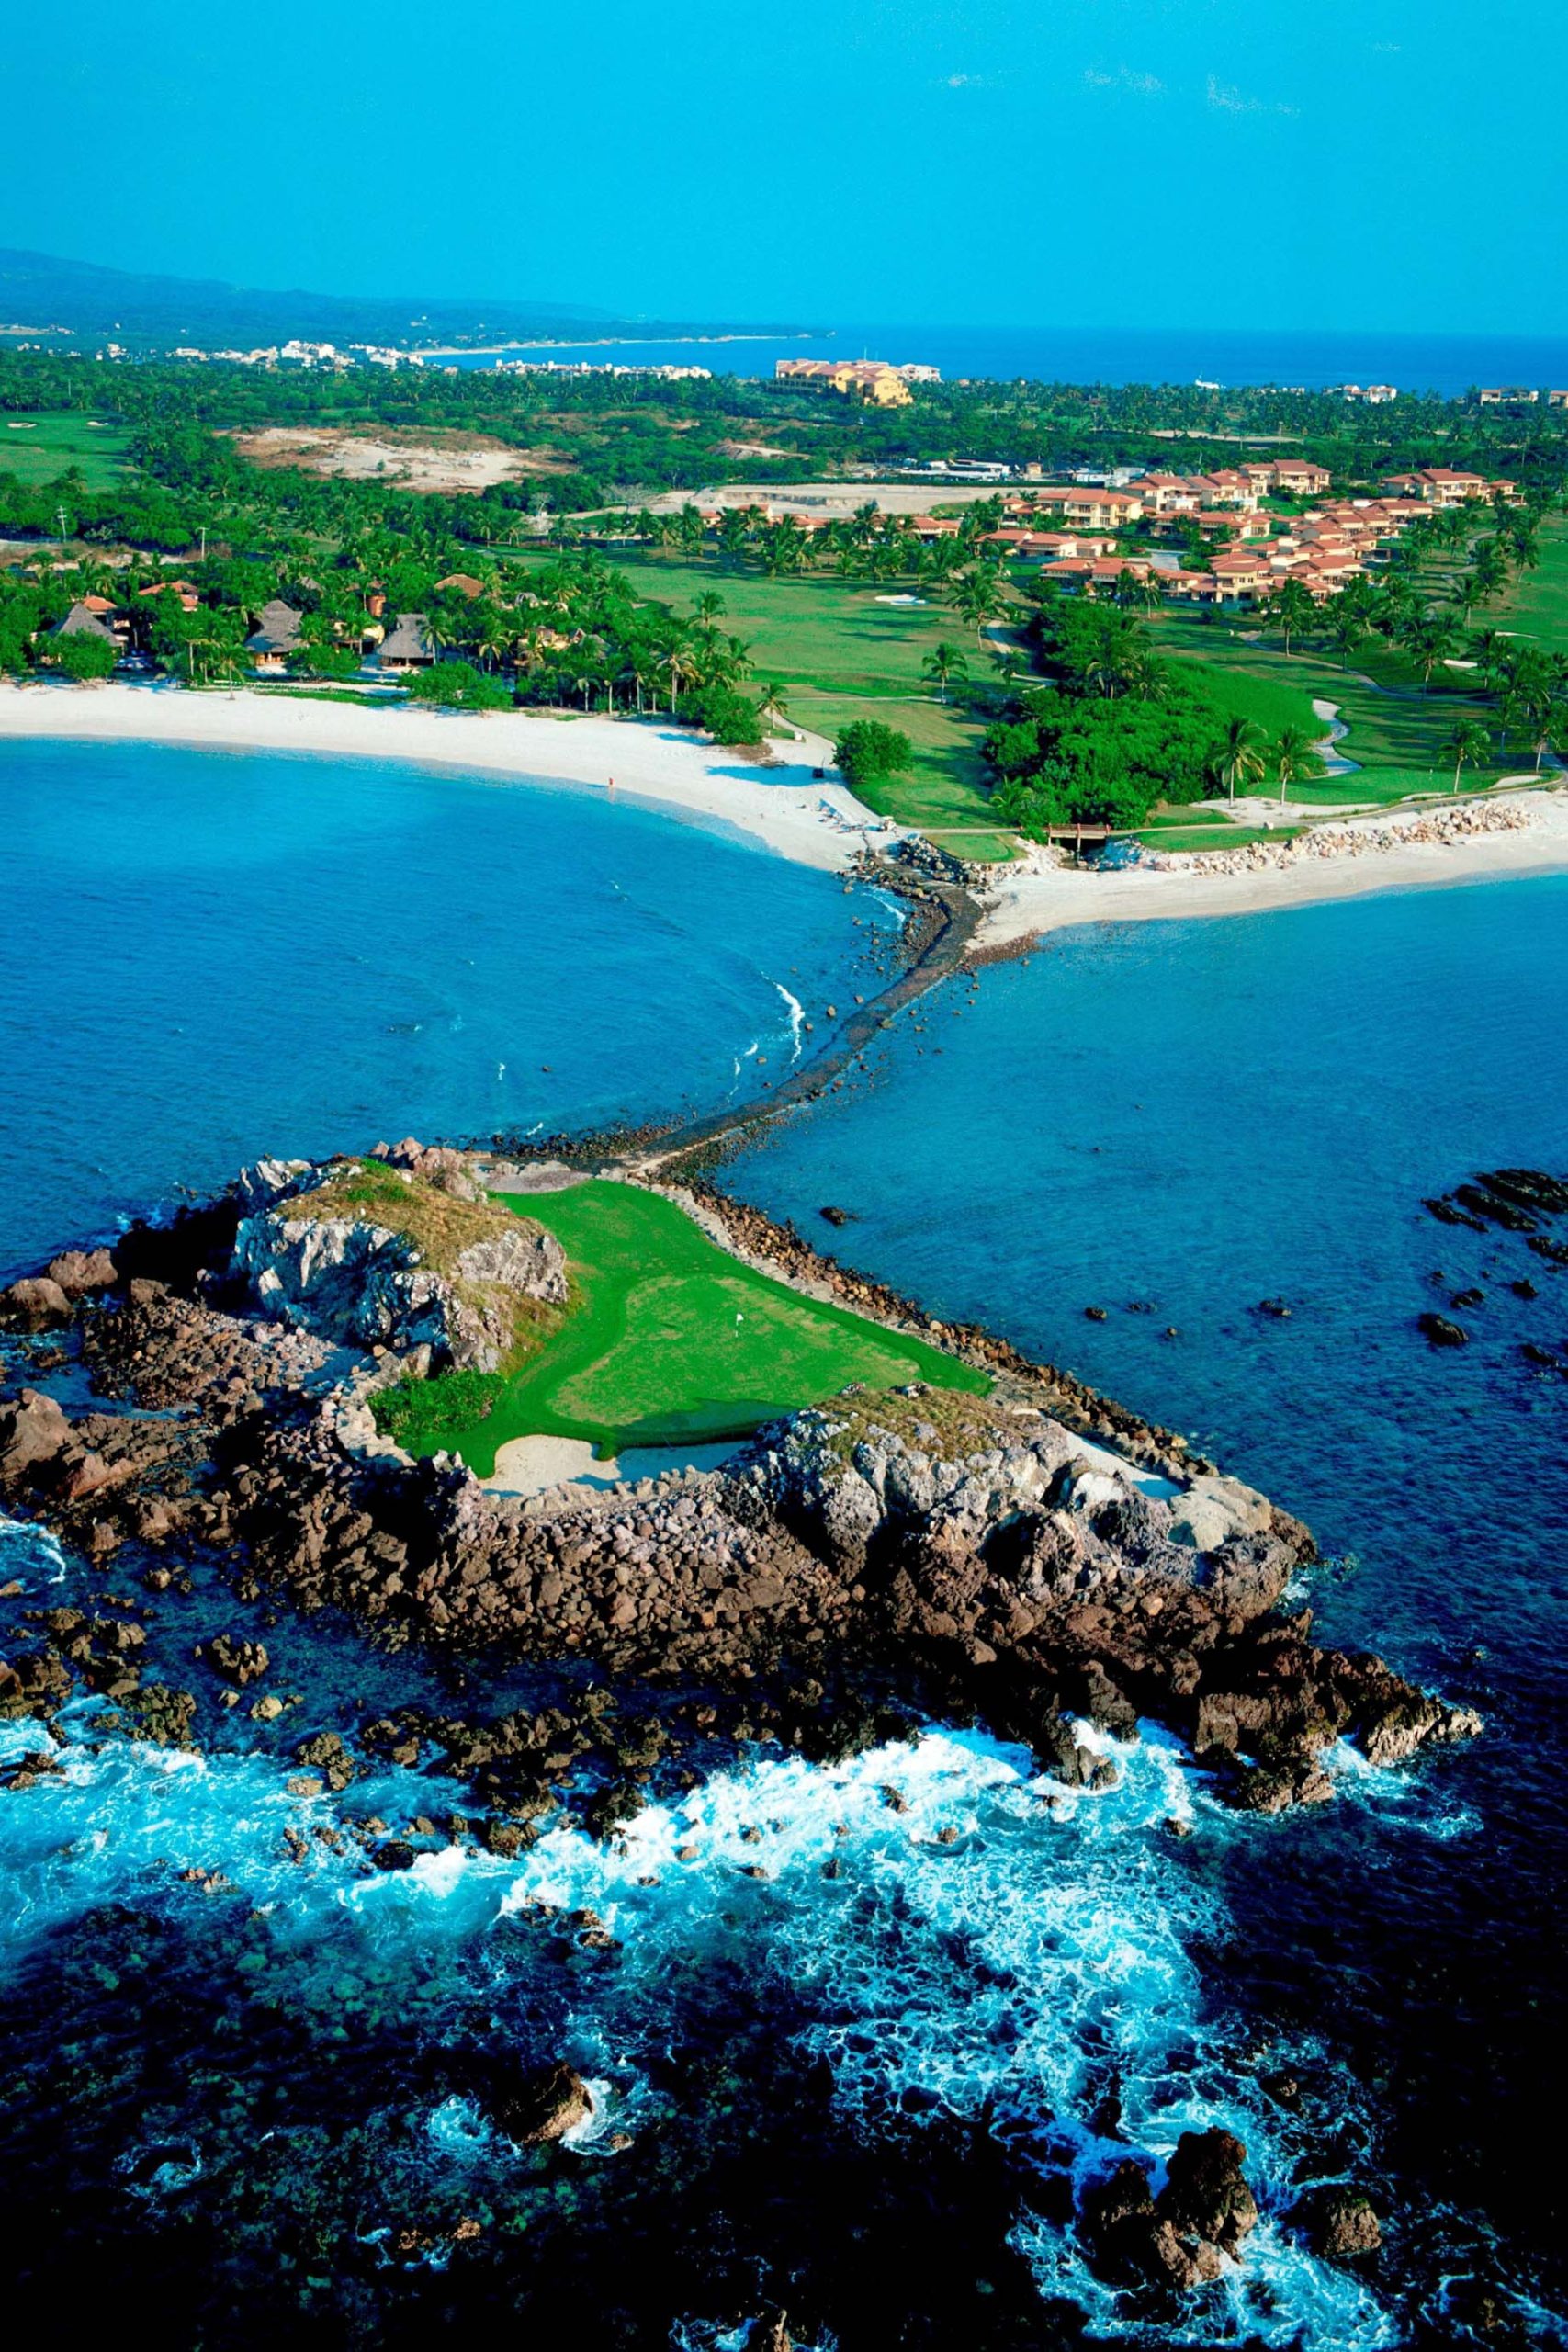 The St. Regis Punta Mita Resort – Nayarit, Mexico – Tail of the Whale Hole